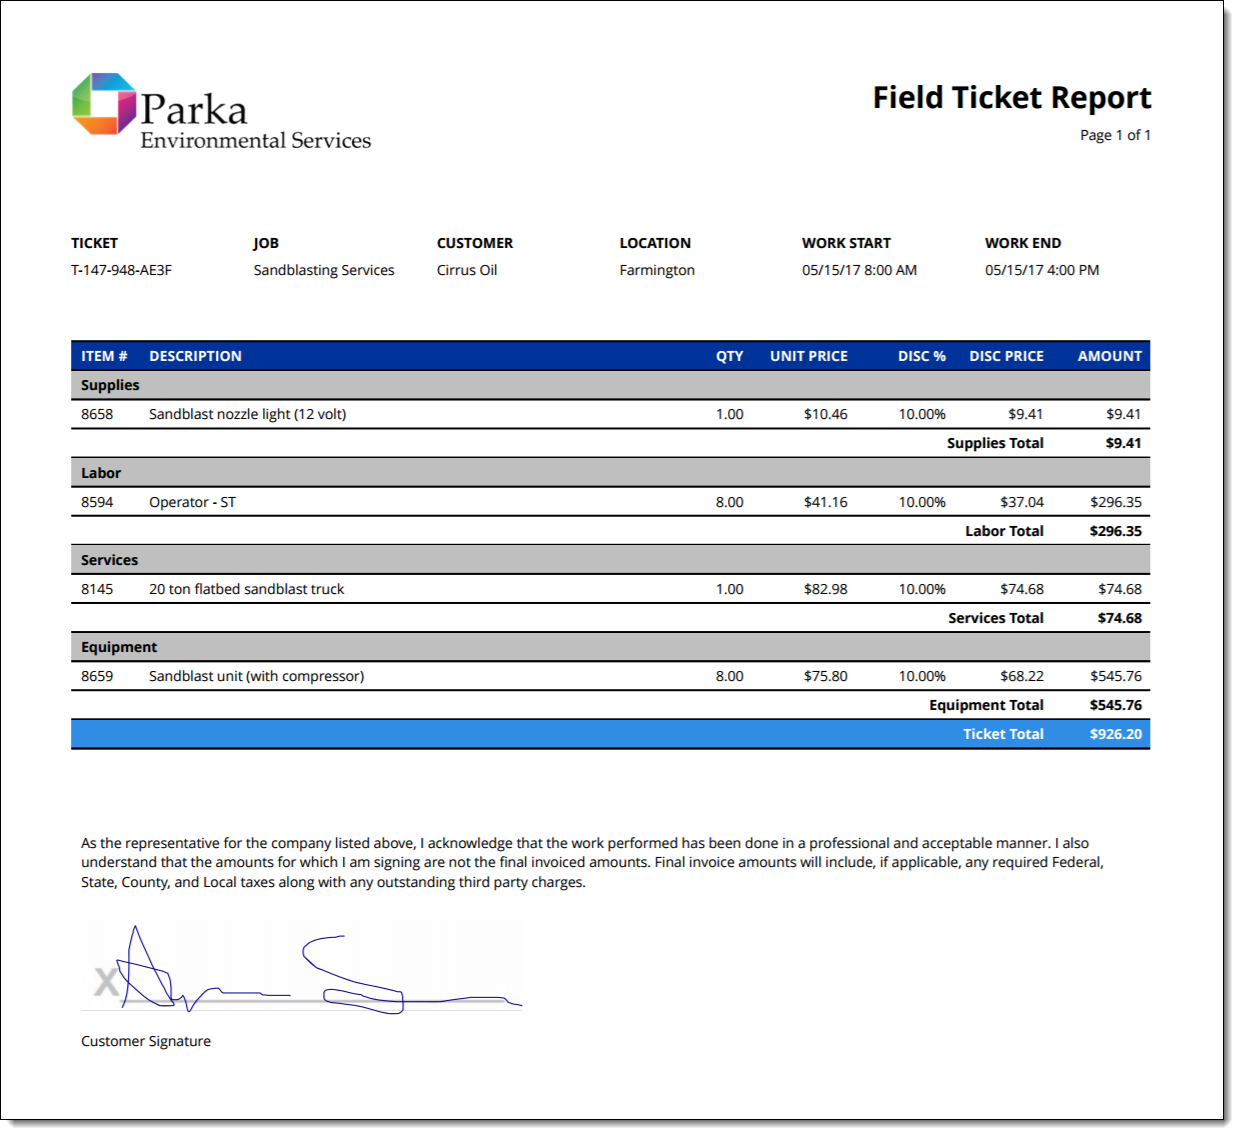 Example of the PDF of a field ticket report